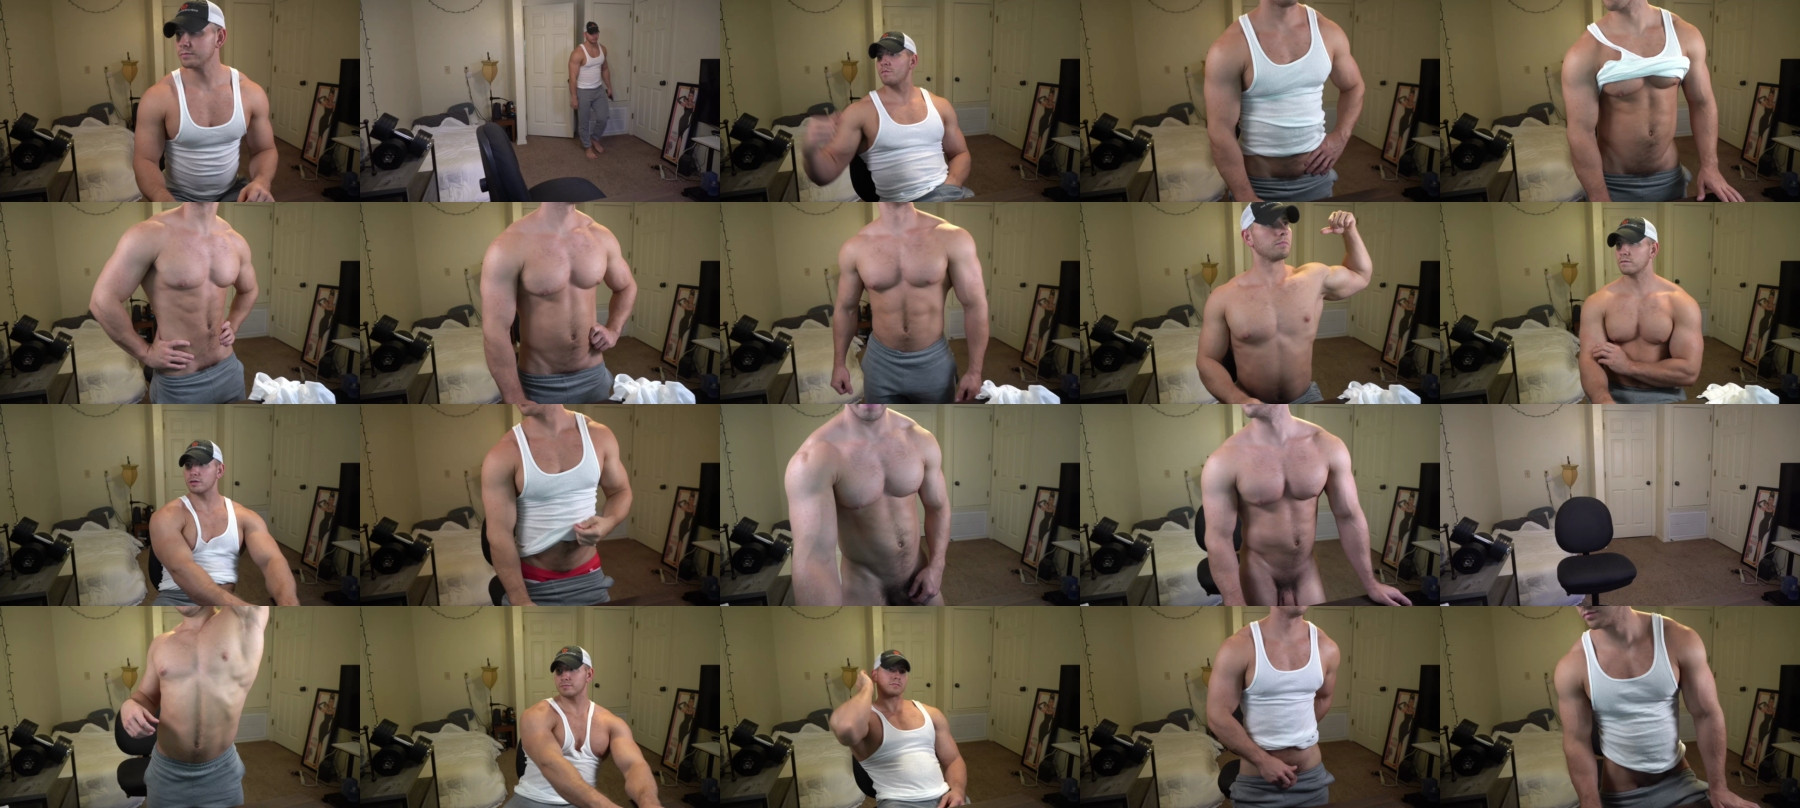 Hotmuscles6t9 Porn CAM SHOW @ Chaturbate 23-04-2021